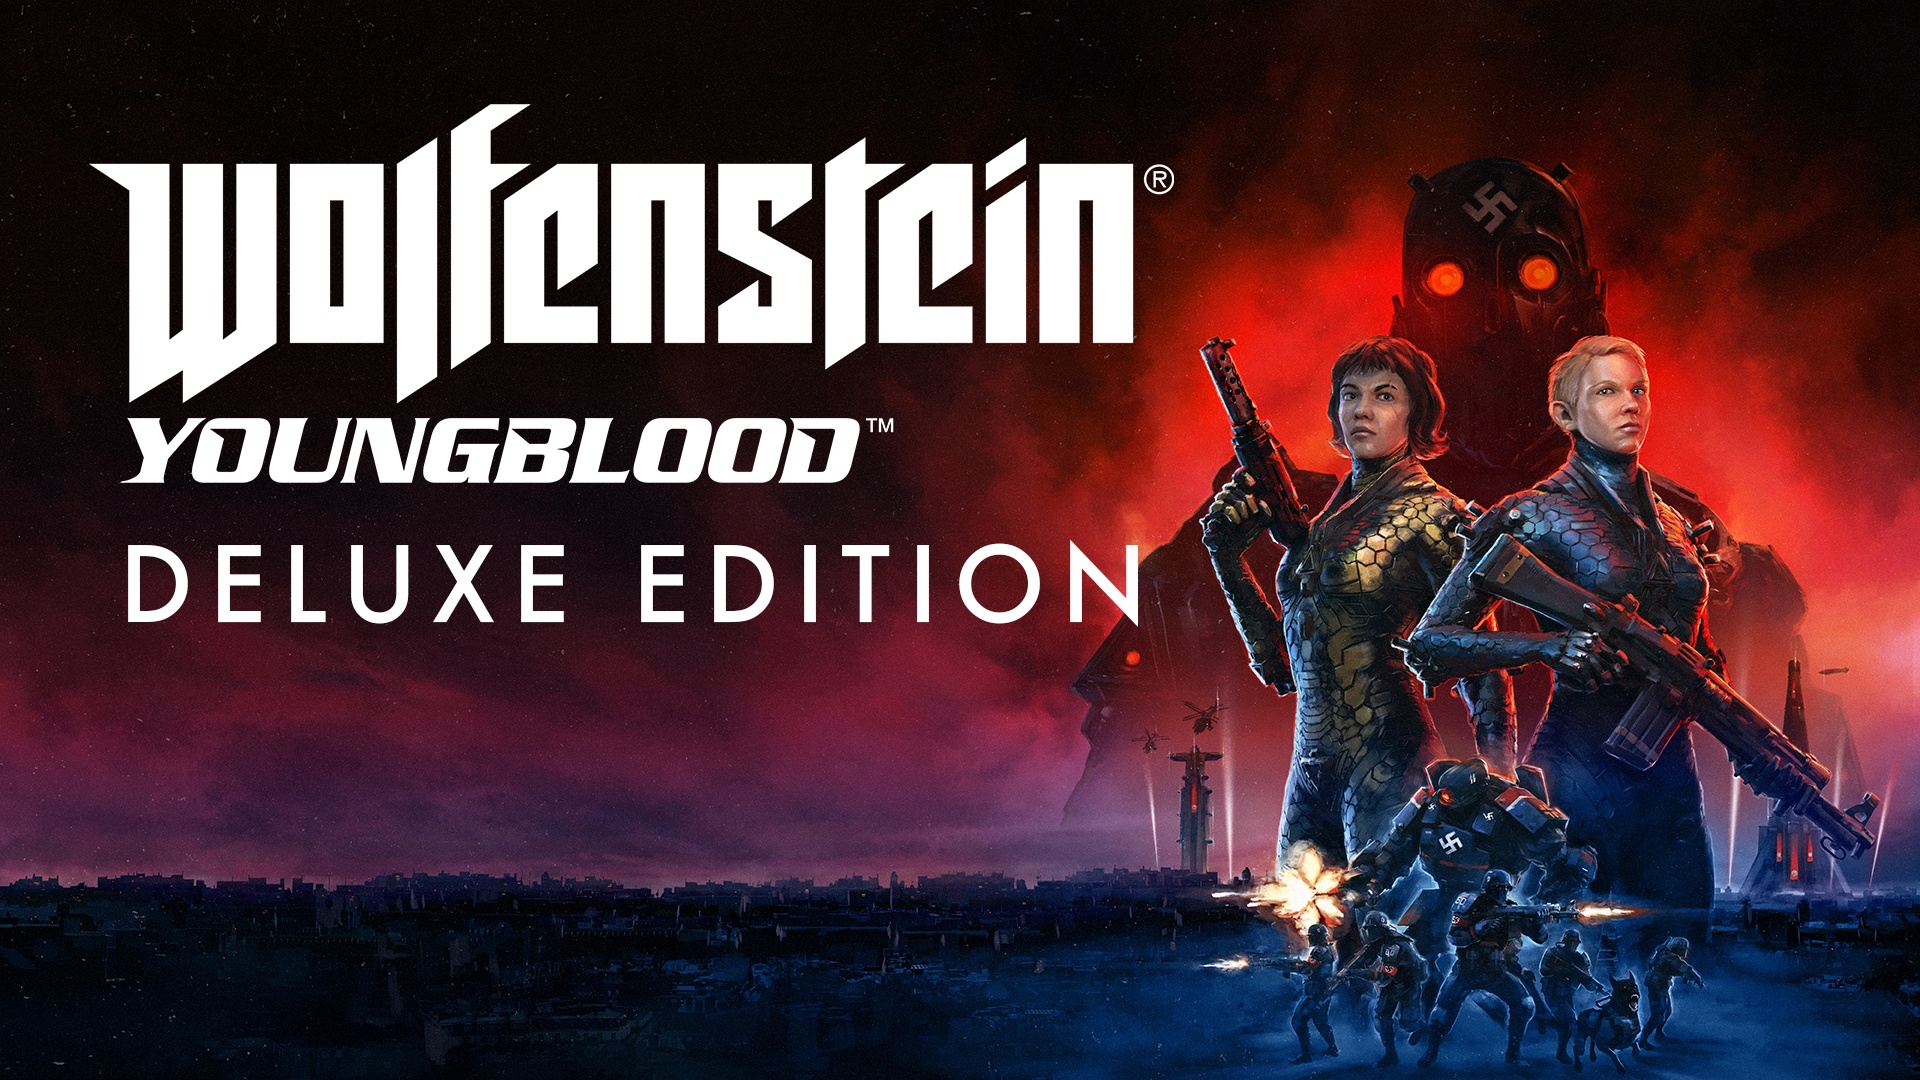 Wolfenstein: Youngblood Deluxe Edition XBOX ONE X|S ?